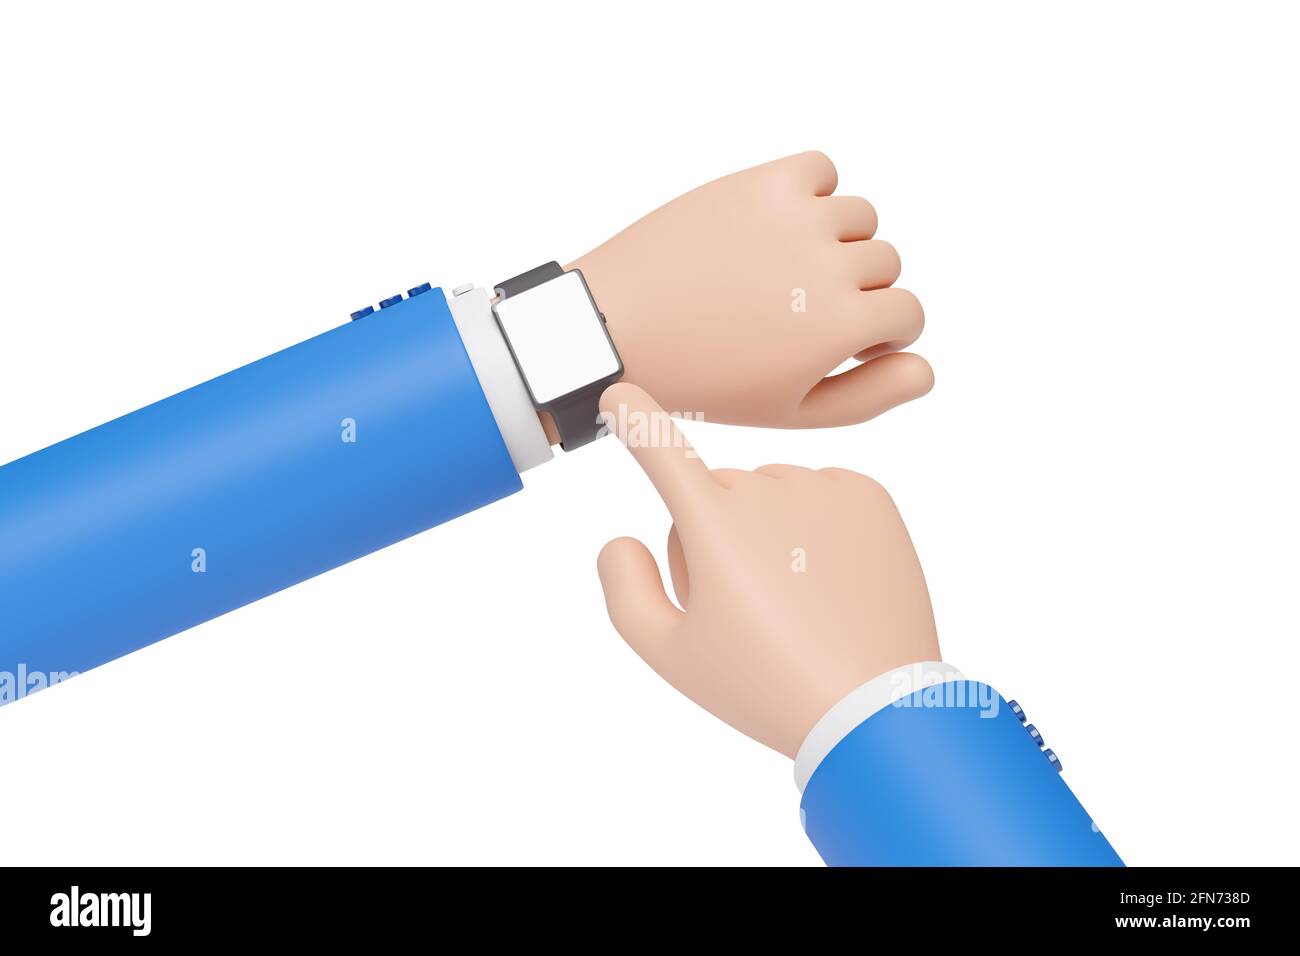 Cartoon hands wearing a wristwatch isolated in white background. 3d illustration. Stock Photo